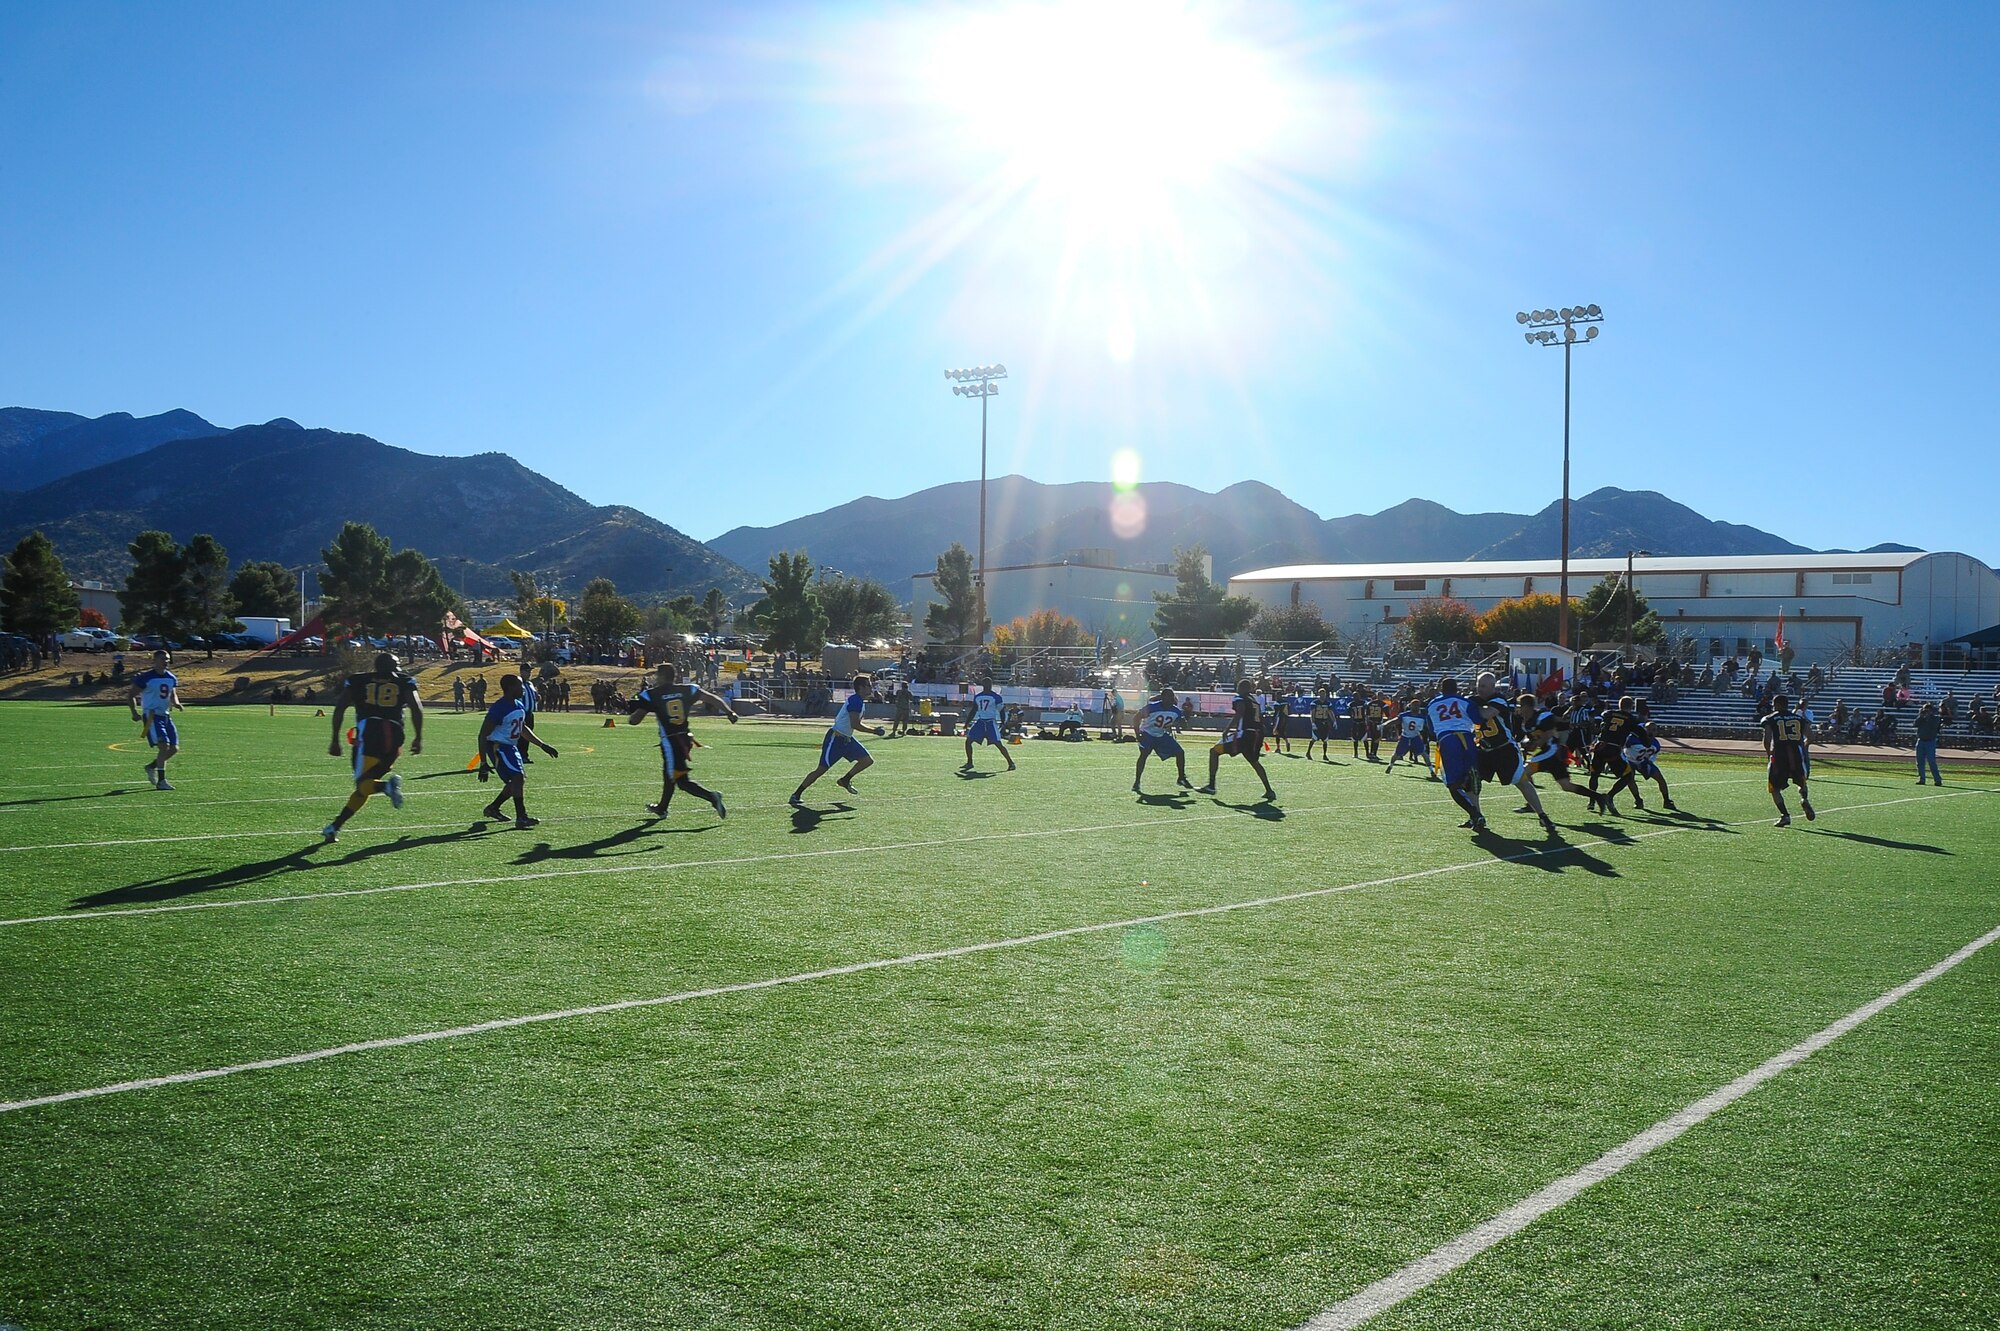 The Davis-Monthan Air Force Base Mustangs play against the Fort Huachuca Black Knights during the Turkey Bowl 2015 at Fort Huachuca, Ariz., Nov. 20, 2015. Along with the free game, the Fort Huachuca Chaplains’ local food locker was accepting donations such as canned goods, baby supplies and hygiene products. (U.S. Air Force photo by Airman 1st Class Mya M. Crosby/Released)